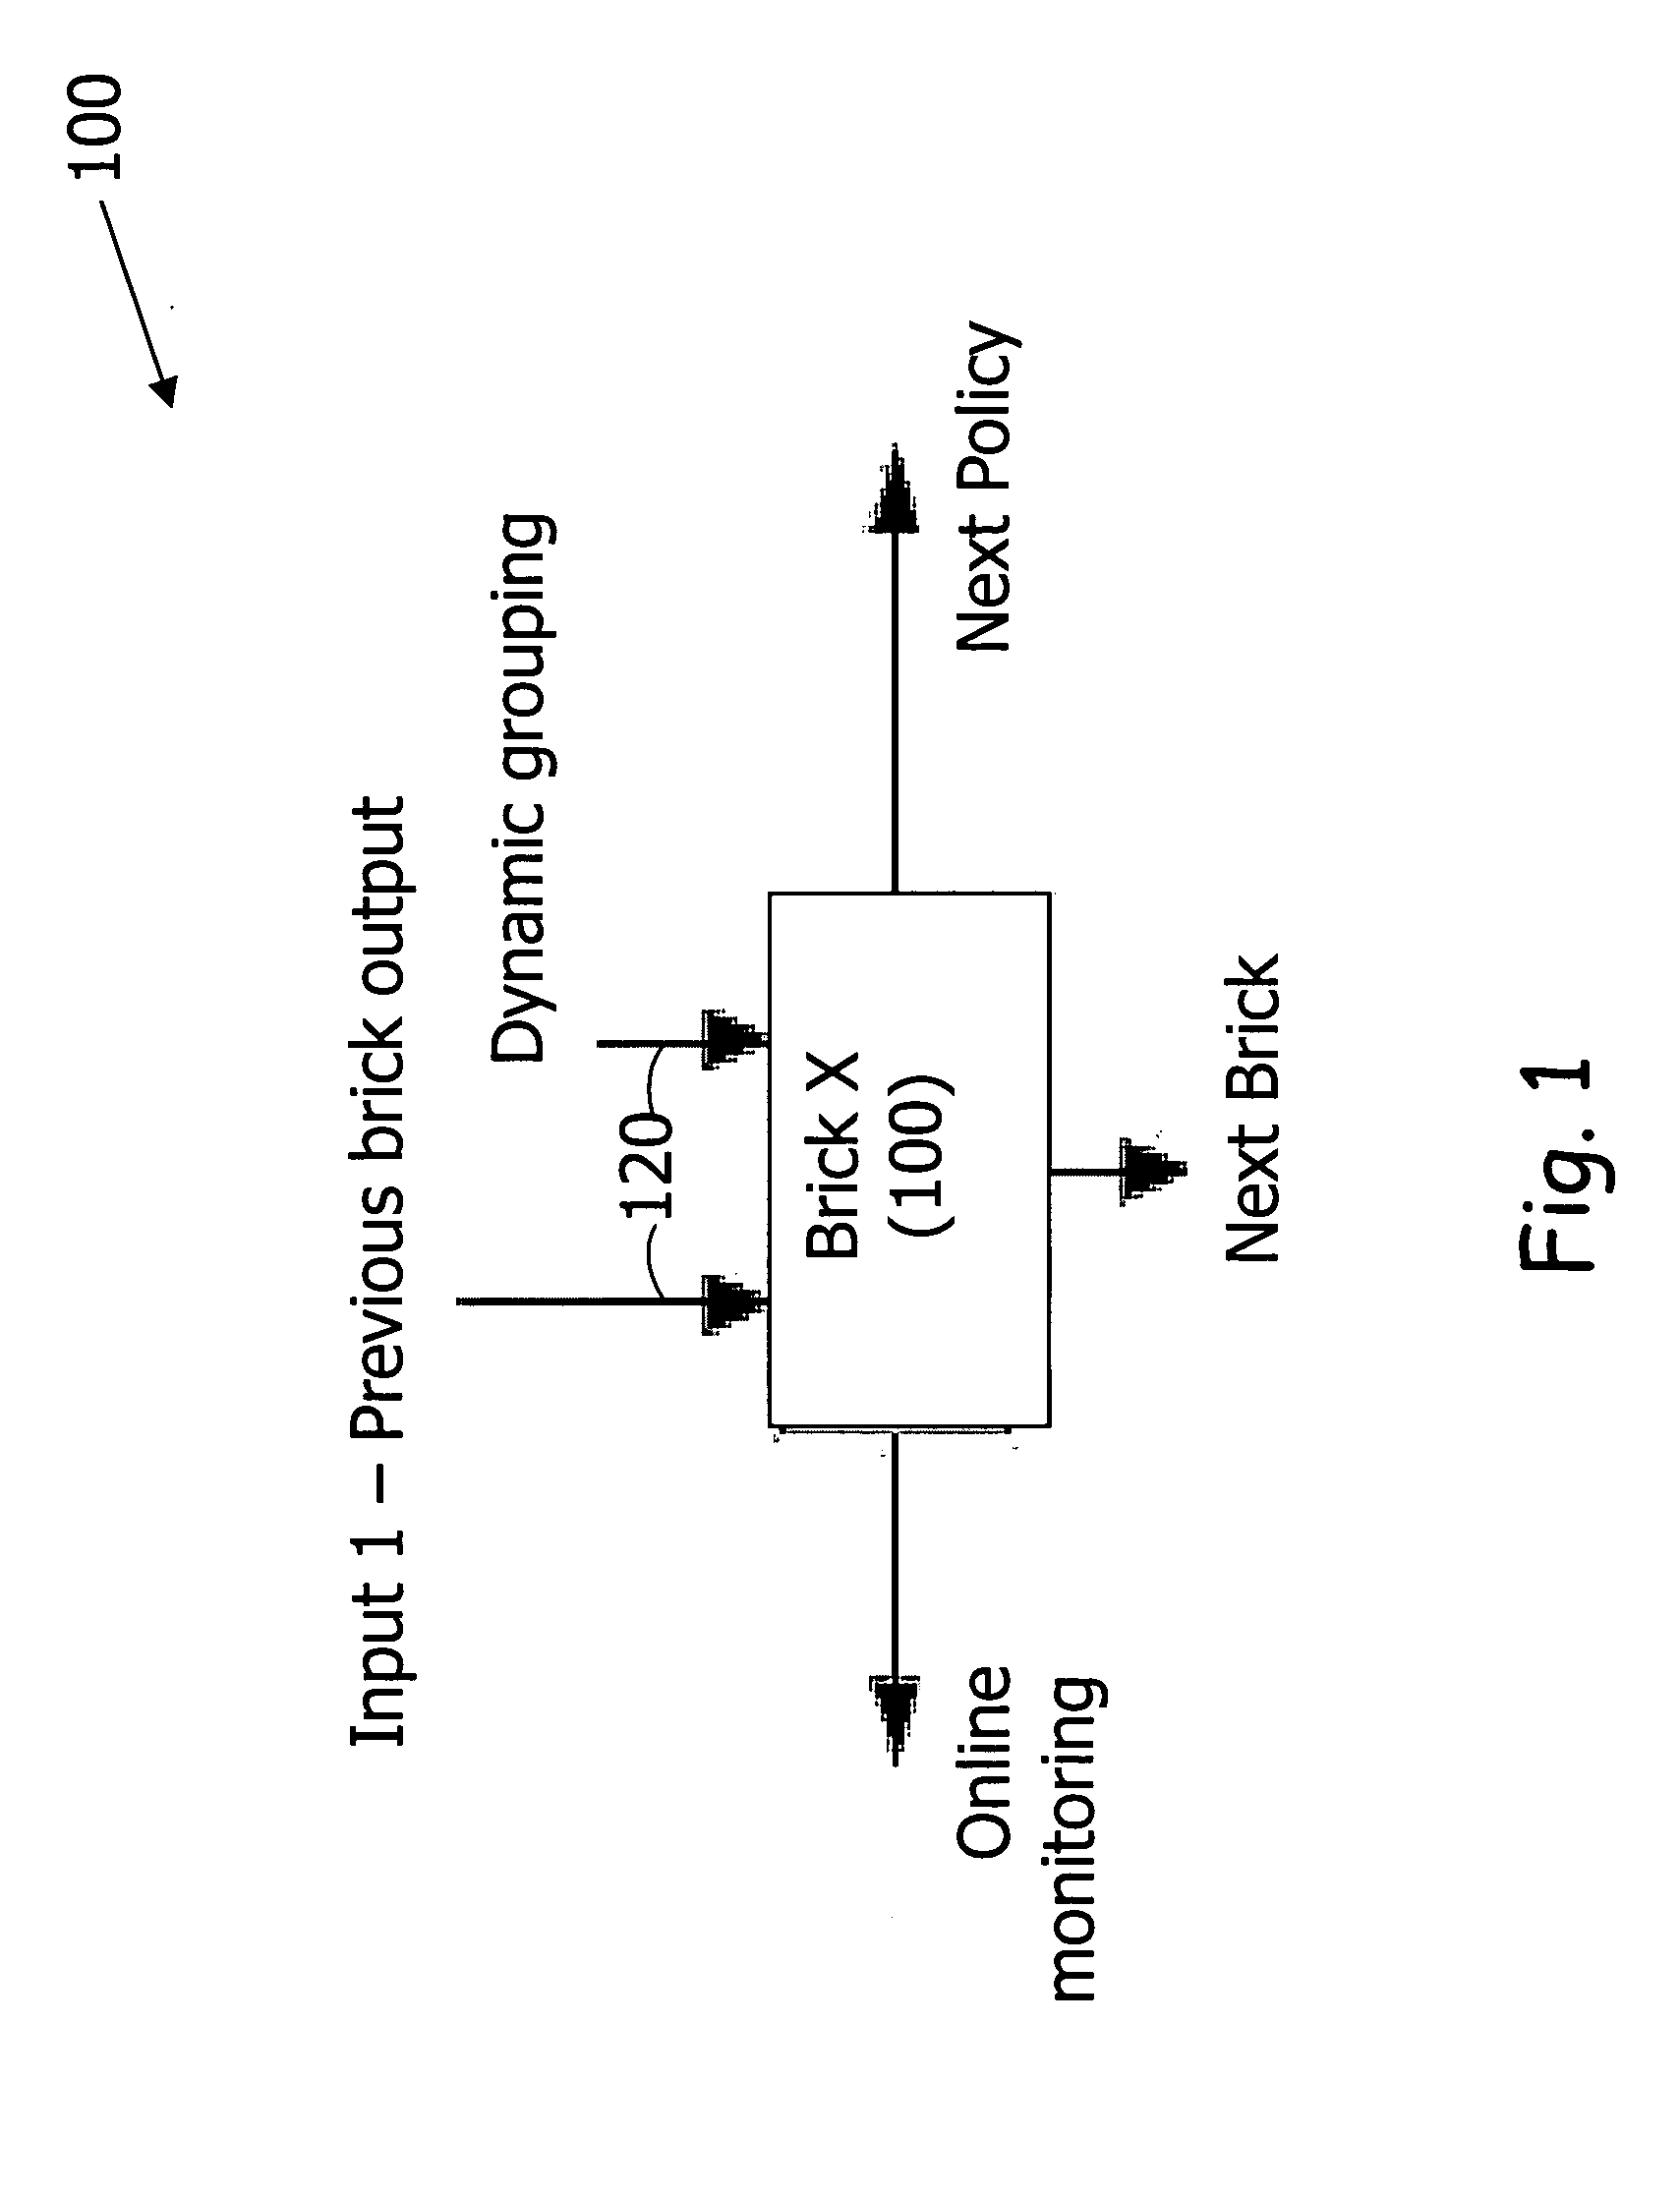 System and method for information technology intrusion prevention